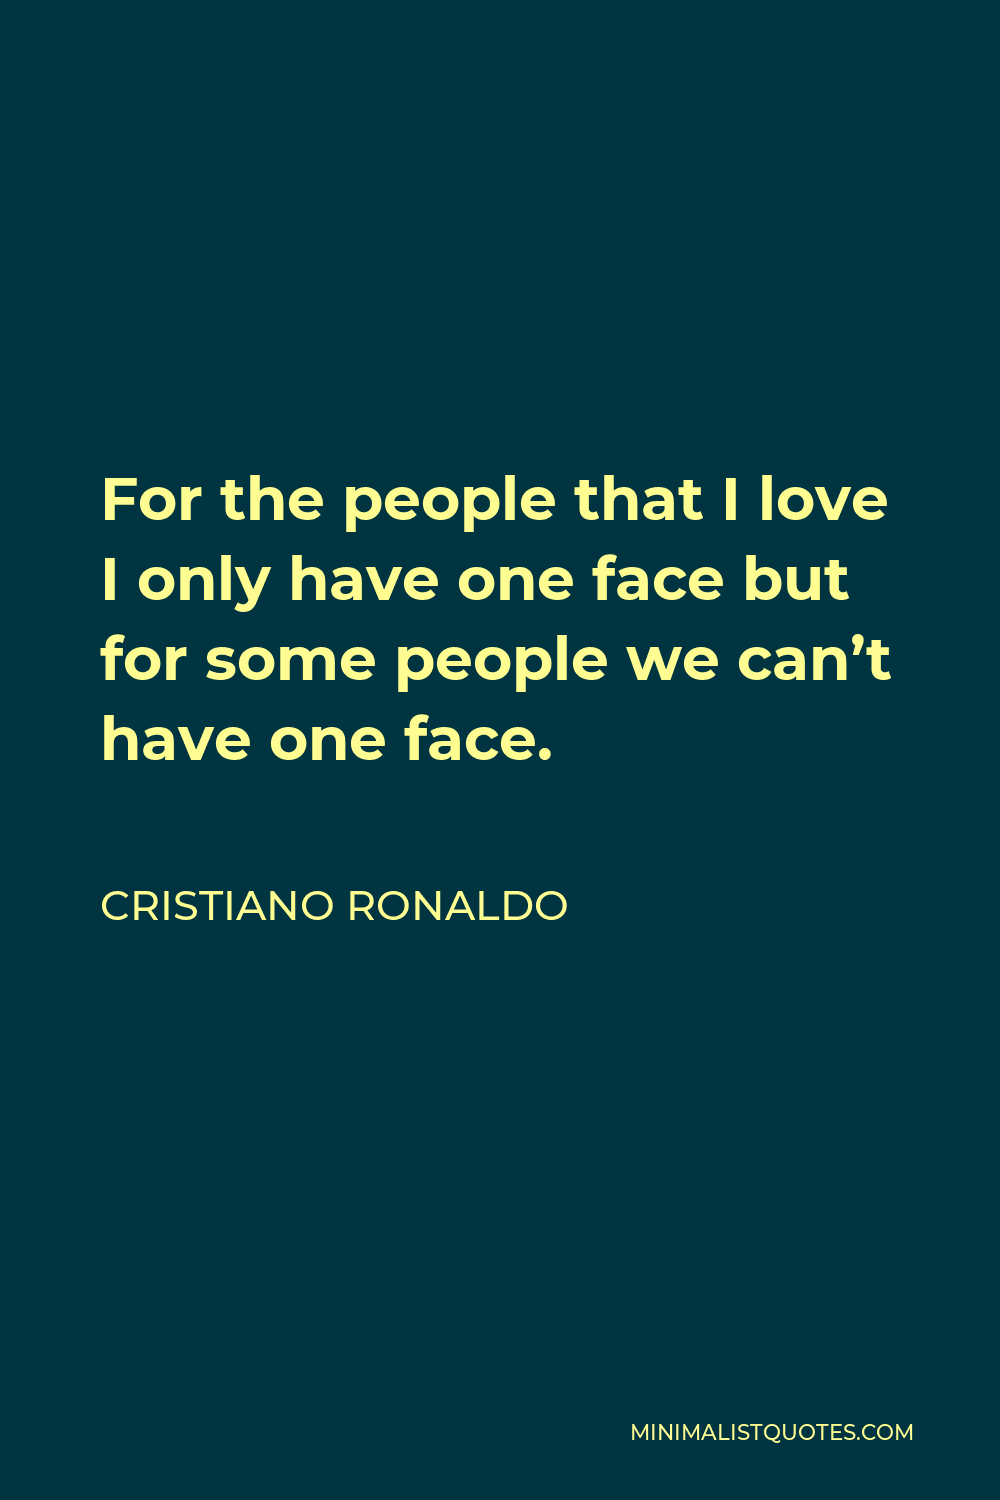 Cristiano Ronaldo Quote - For the people that I love I only have one face but for some people we can’t have one face.